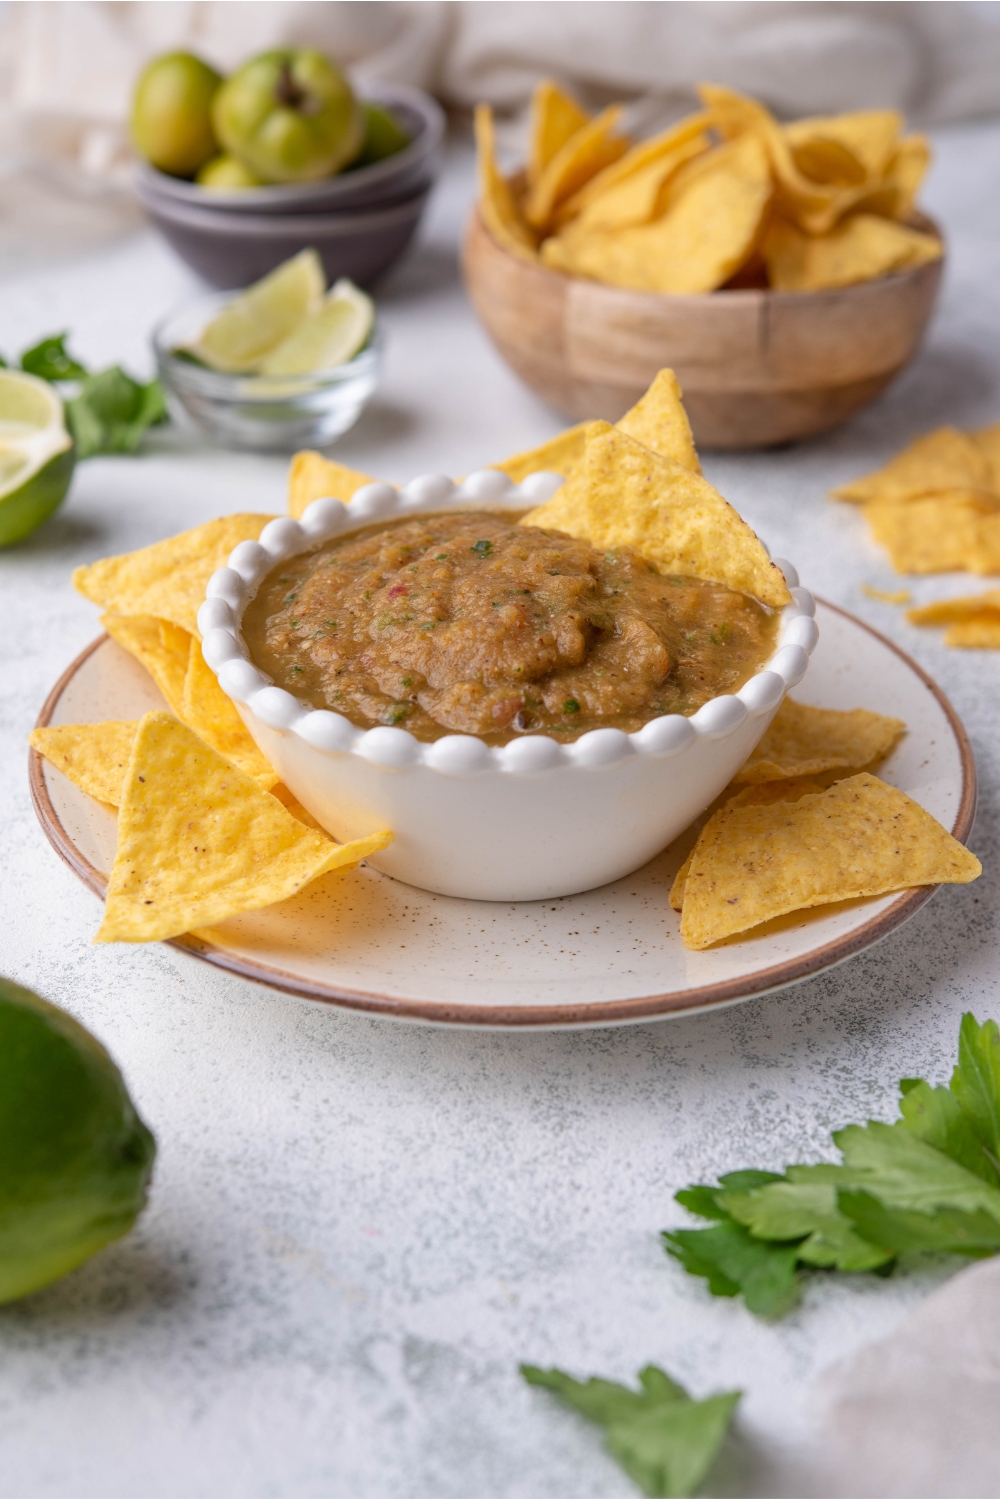 Tomatillo salsa in a small white bowl with tortilla chips in the salsa. The bowl is on top of a plate filled with tortilla chips. In the background there is a bowl of tomatillos and a bowl of tortilla chips.